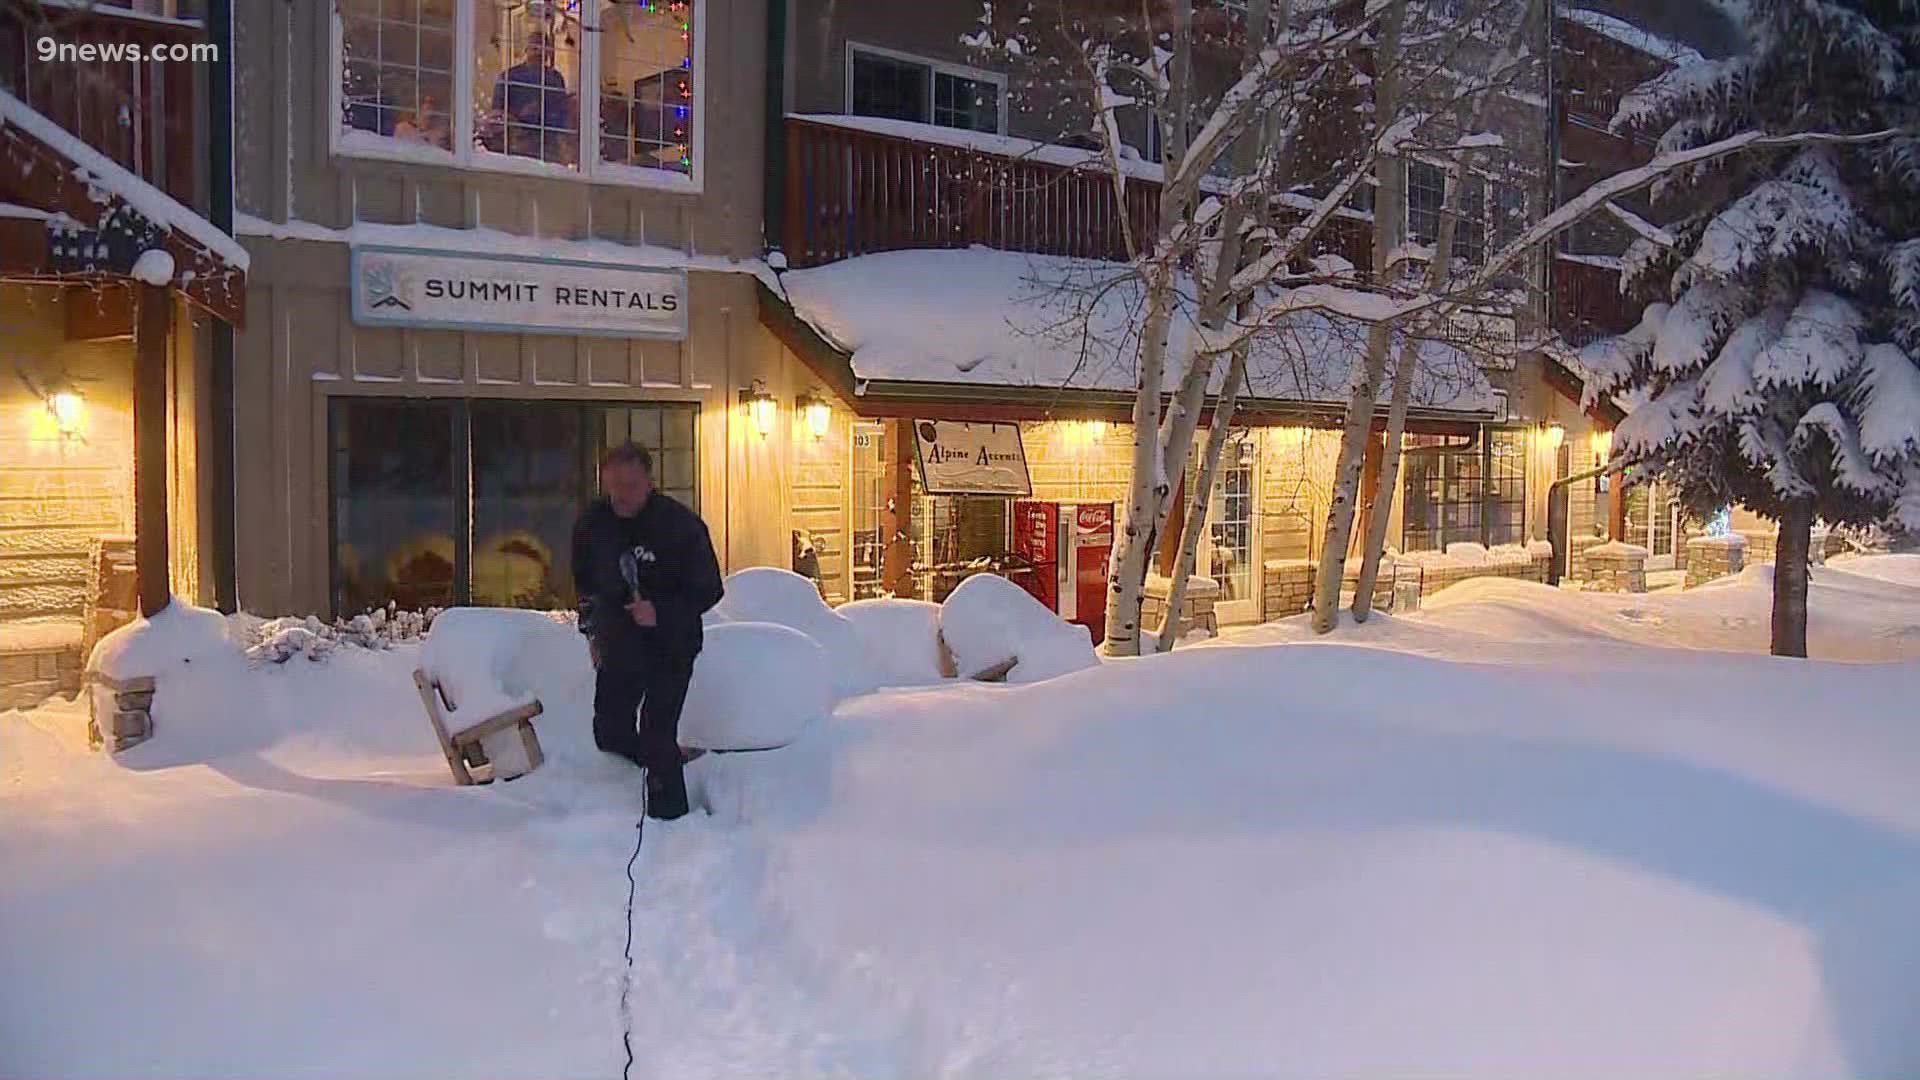 The High Country once again saw most the of snow from out most recent storm system. Matt Renoux has a look at conditions Thursday morning in Silverthorne.